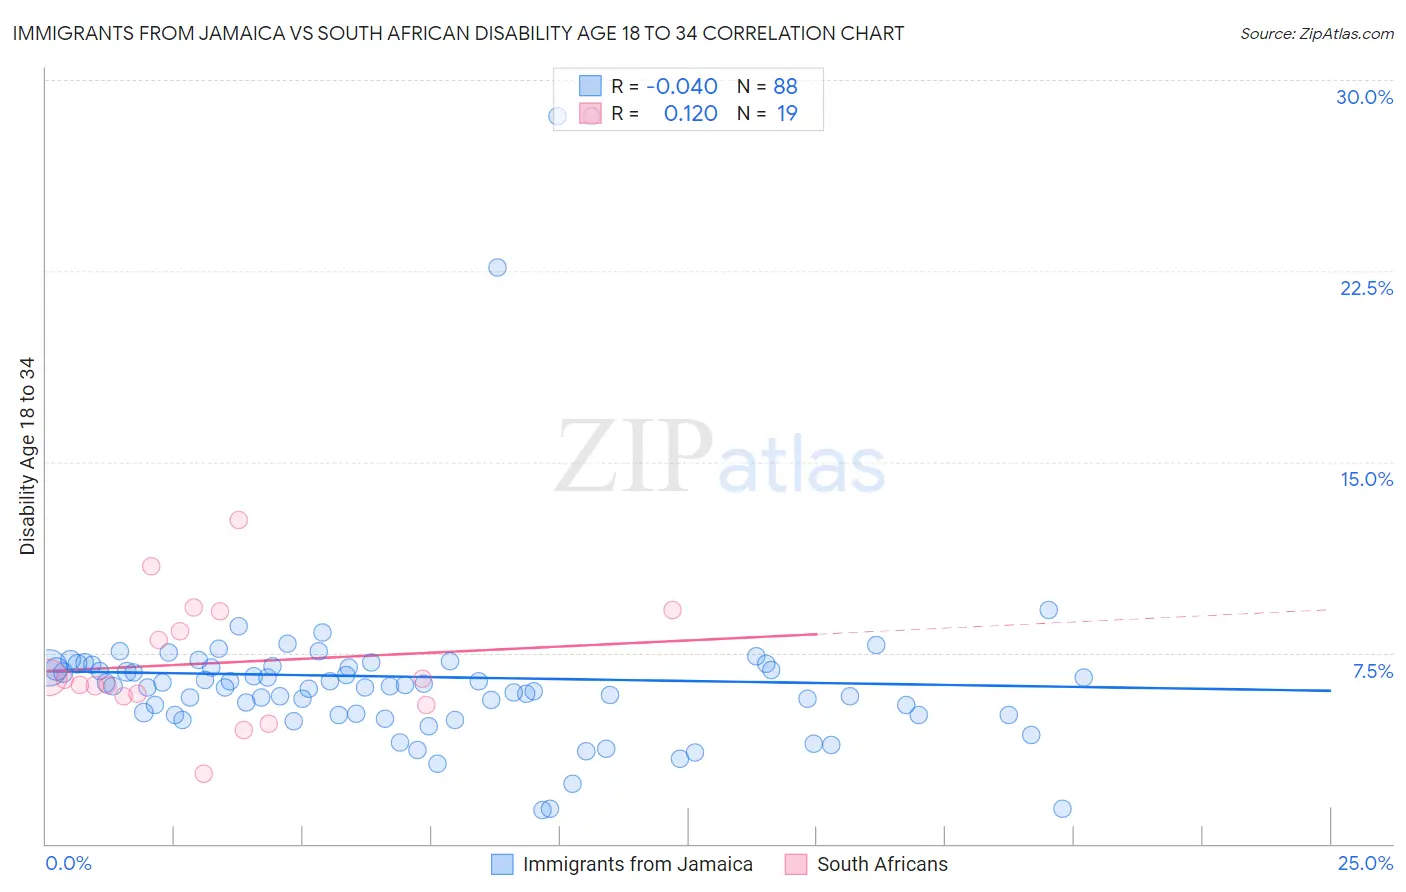 Immigrants from Jamaica vs South African Disability Age 18 to 34